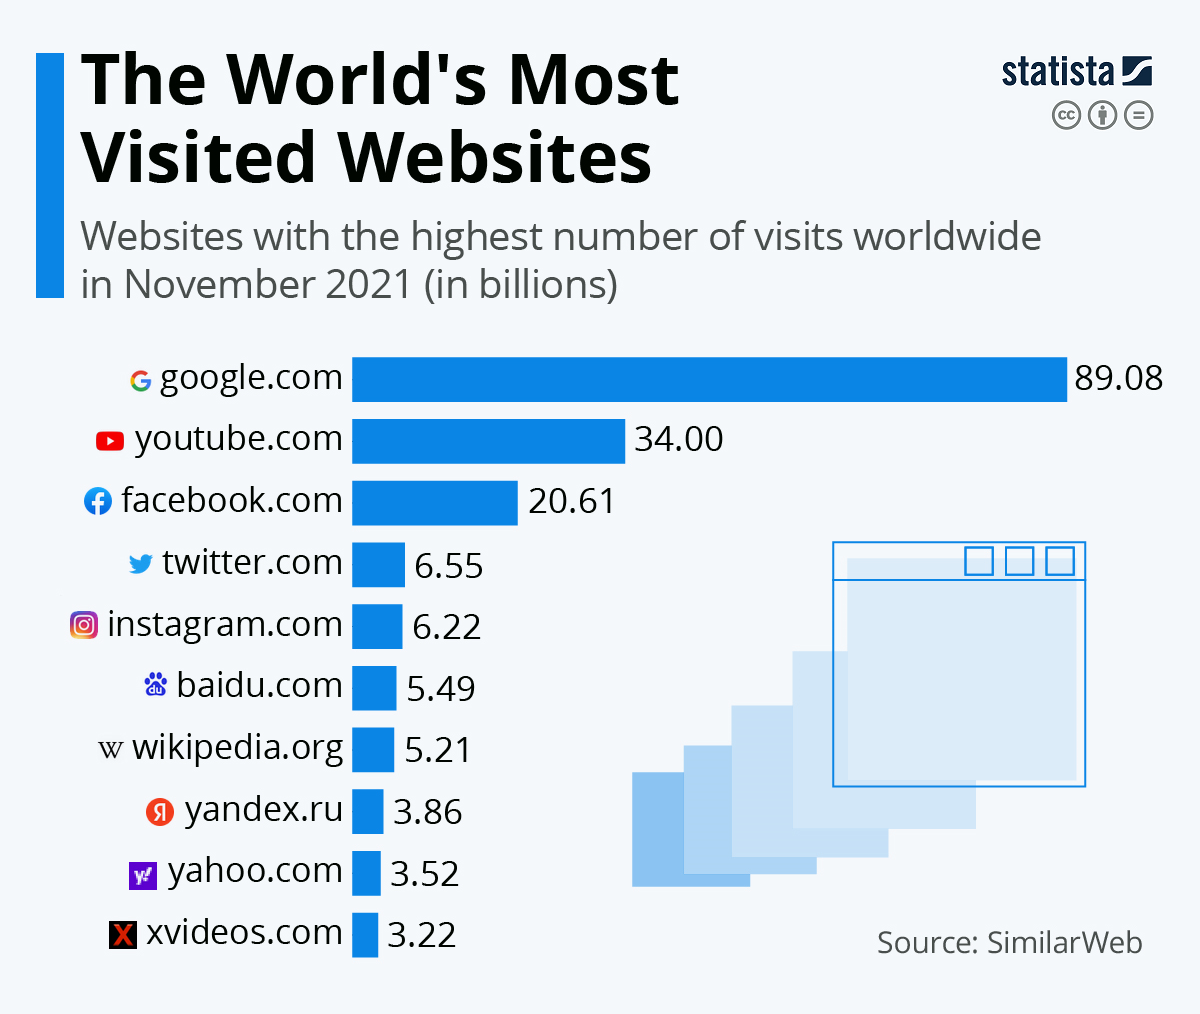 World Porn Site - What Are the Most Visited Websites in the World?